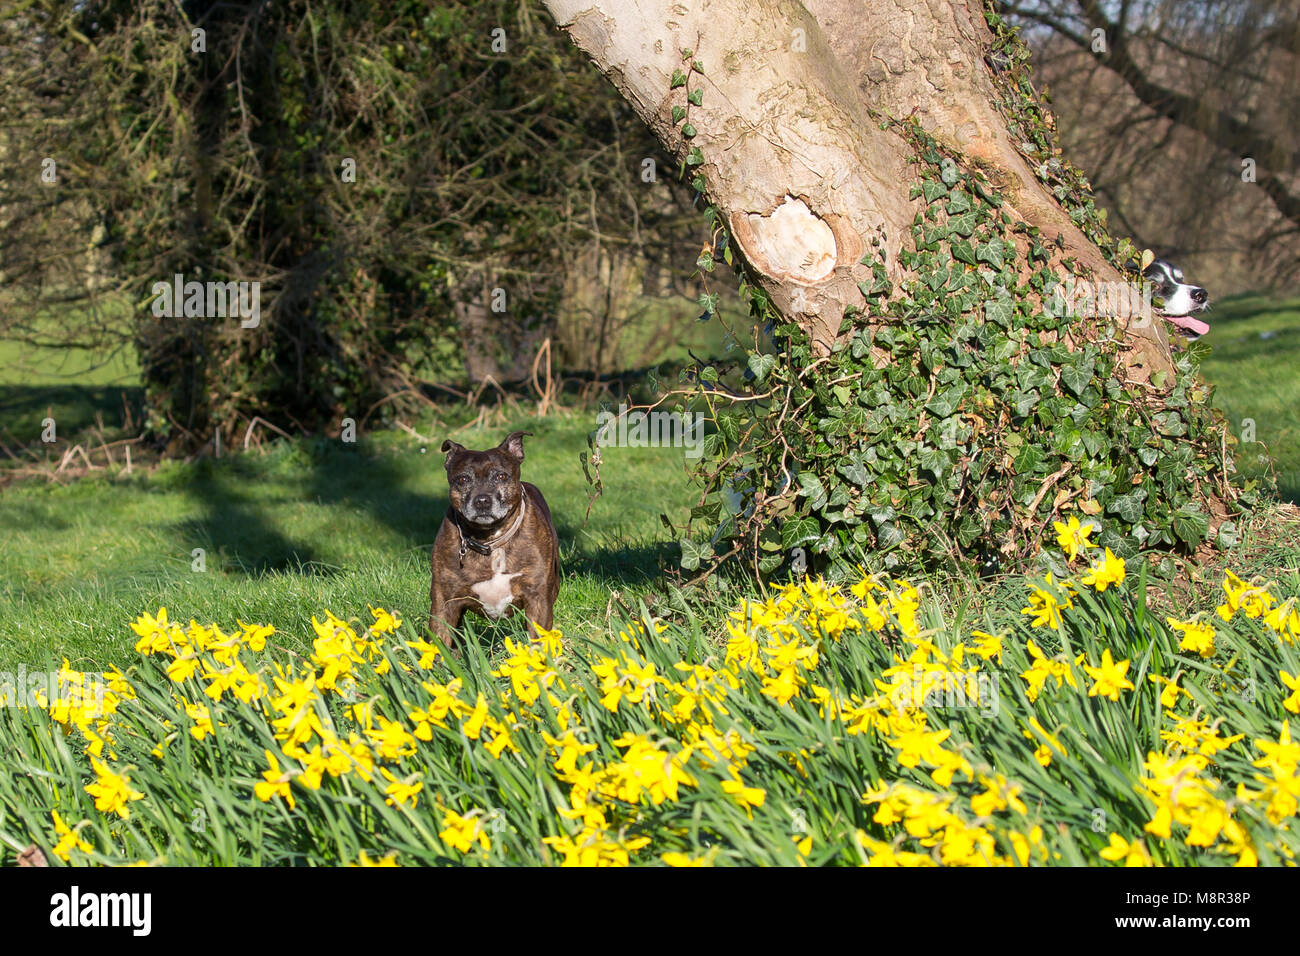 Kidderminster, UK. 20th March, 2018. UK weather: glorious sunshine marks the start of spring in Worcestershire. The bright sunshine has brought out these colourful yellow daffodils and the local wildlife has come out to play too. It looks like hide-and-seek this morning, as these two dogs chase each other around the daffodil-filled local park. Credit: Lee Hudson/Alamy Live News Stock Photo